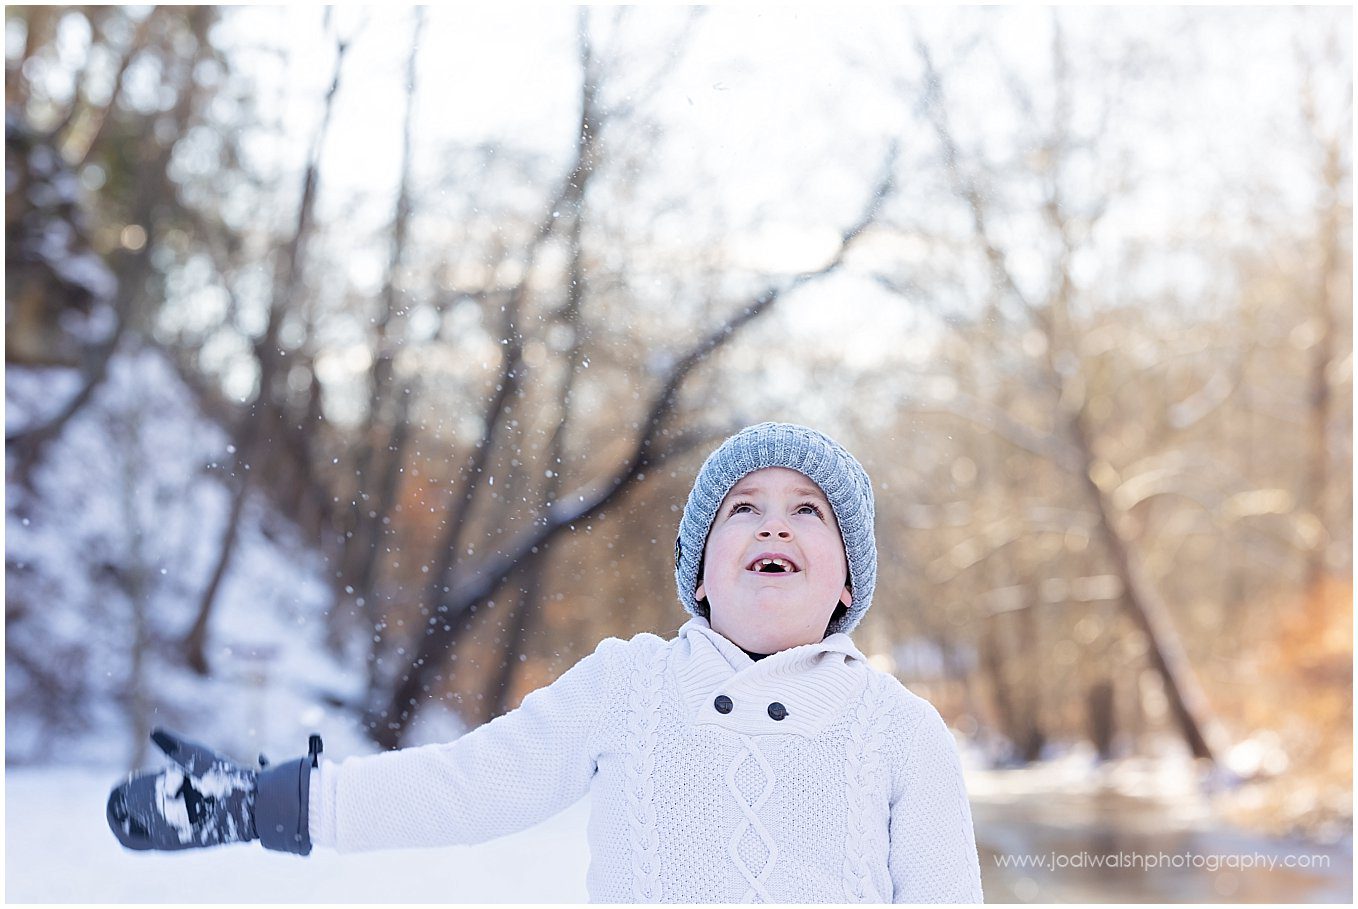 image of a little boy in a white sweater and gray knit hat tossing snow over his head